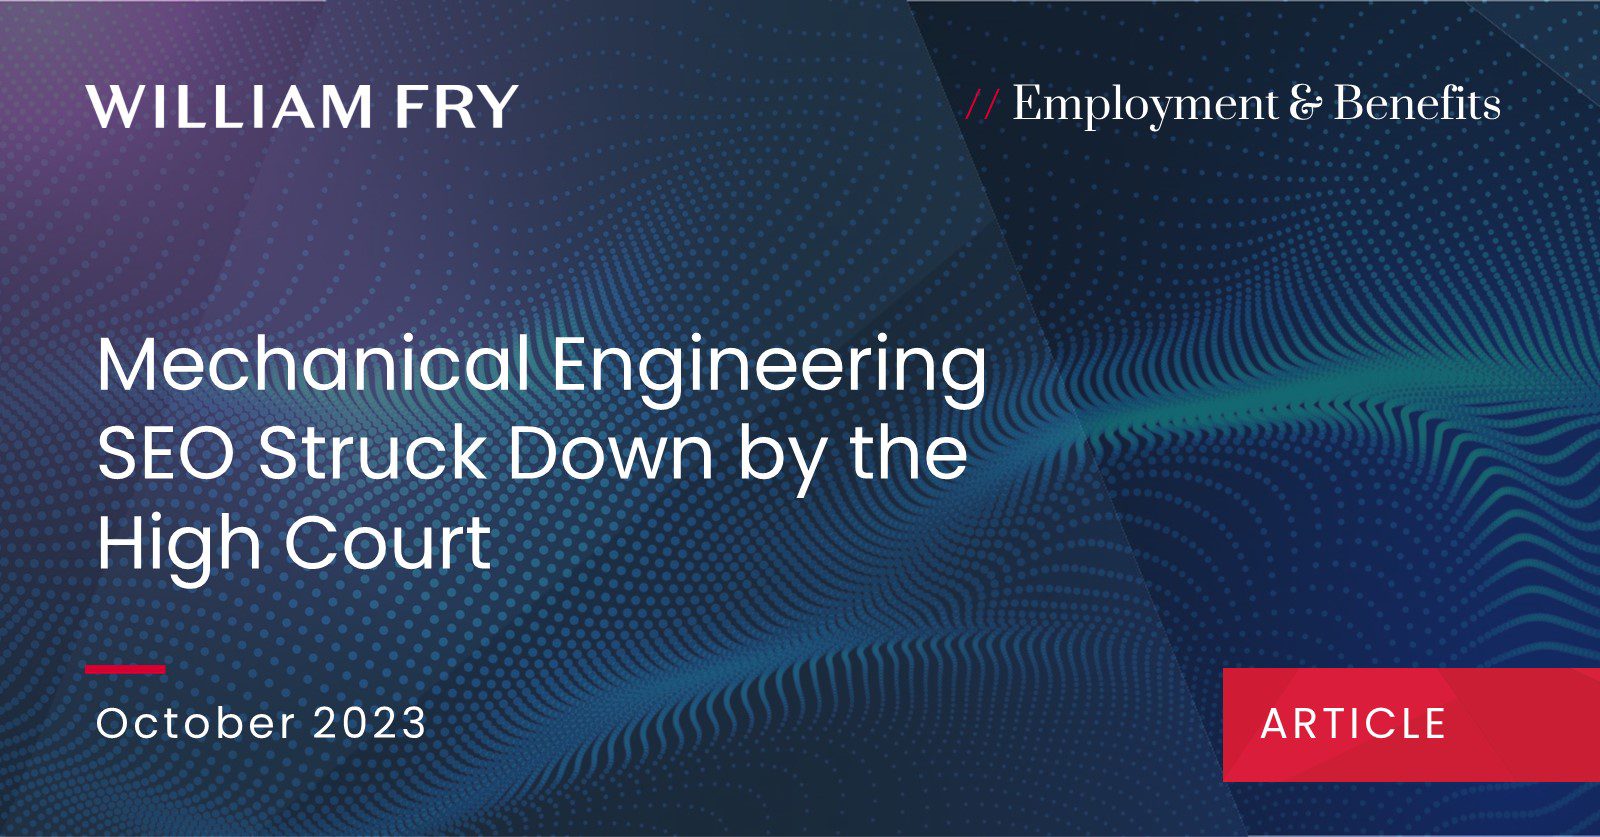 Mechanical Engineering SEO Struck Down by the High Court